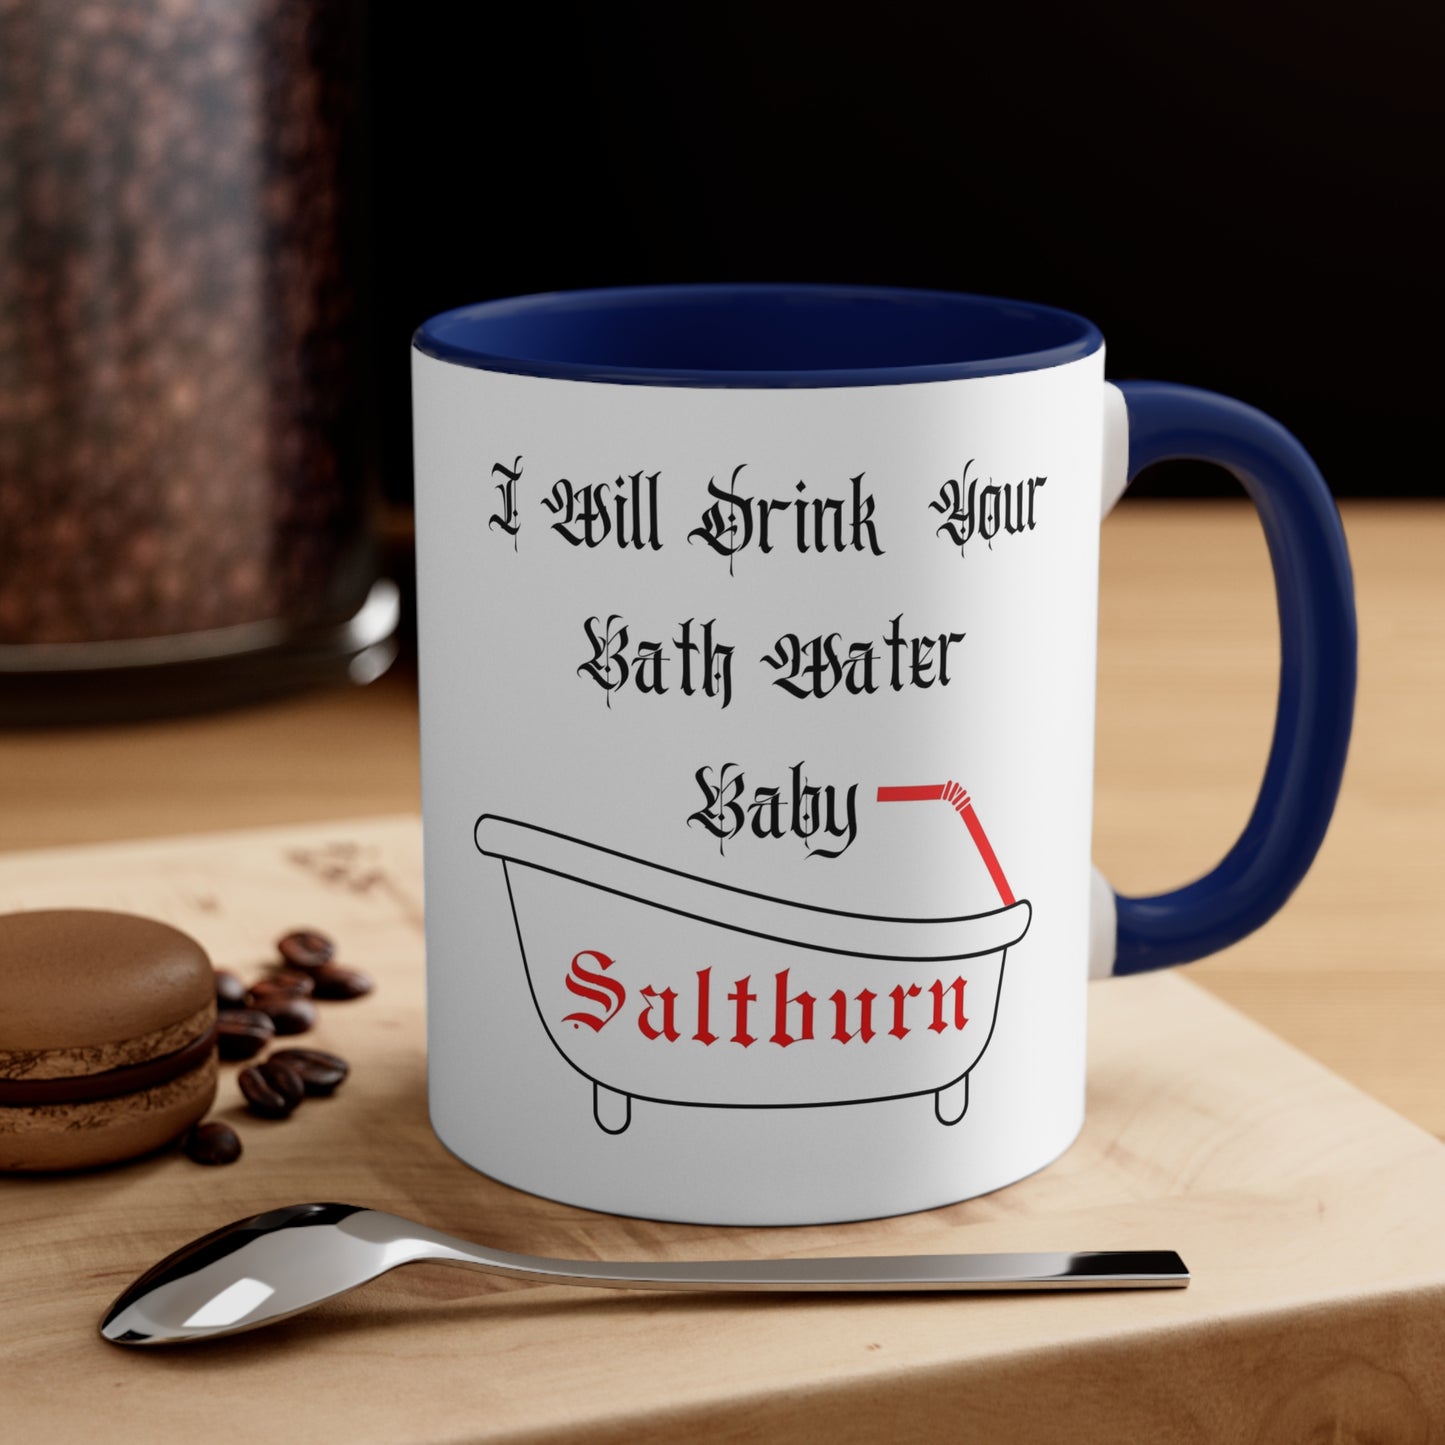 Saltburn Movie Inspired Ceramic Mug 11 oz with 5 different Colors | I will Drink Your Bath Water Baby Cermic Mug